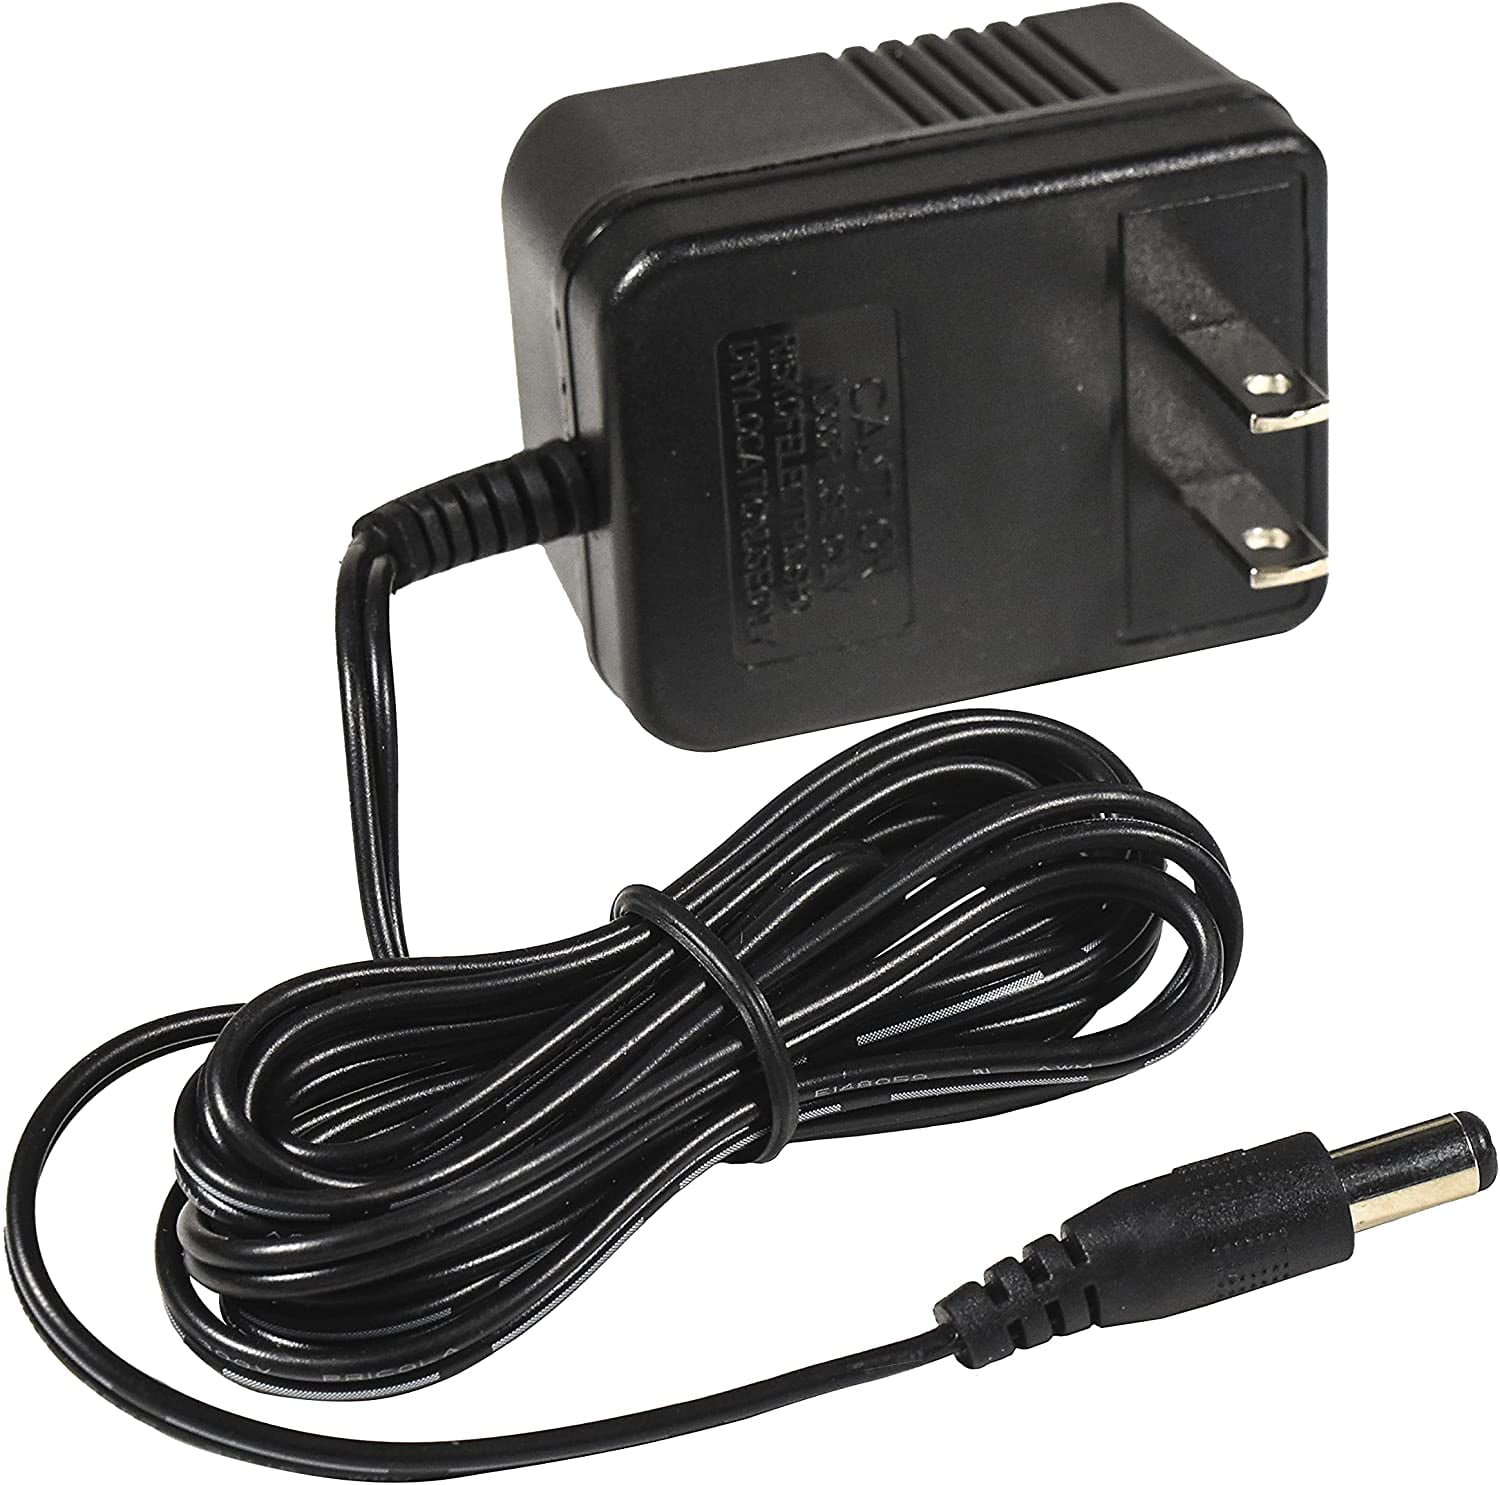 PwrON AC Adapter Replacement for Black & Decker 12Volt 90517269 B&D  Cordless Grass Trimmer Charger 